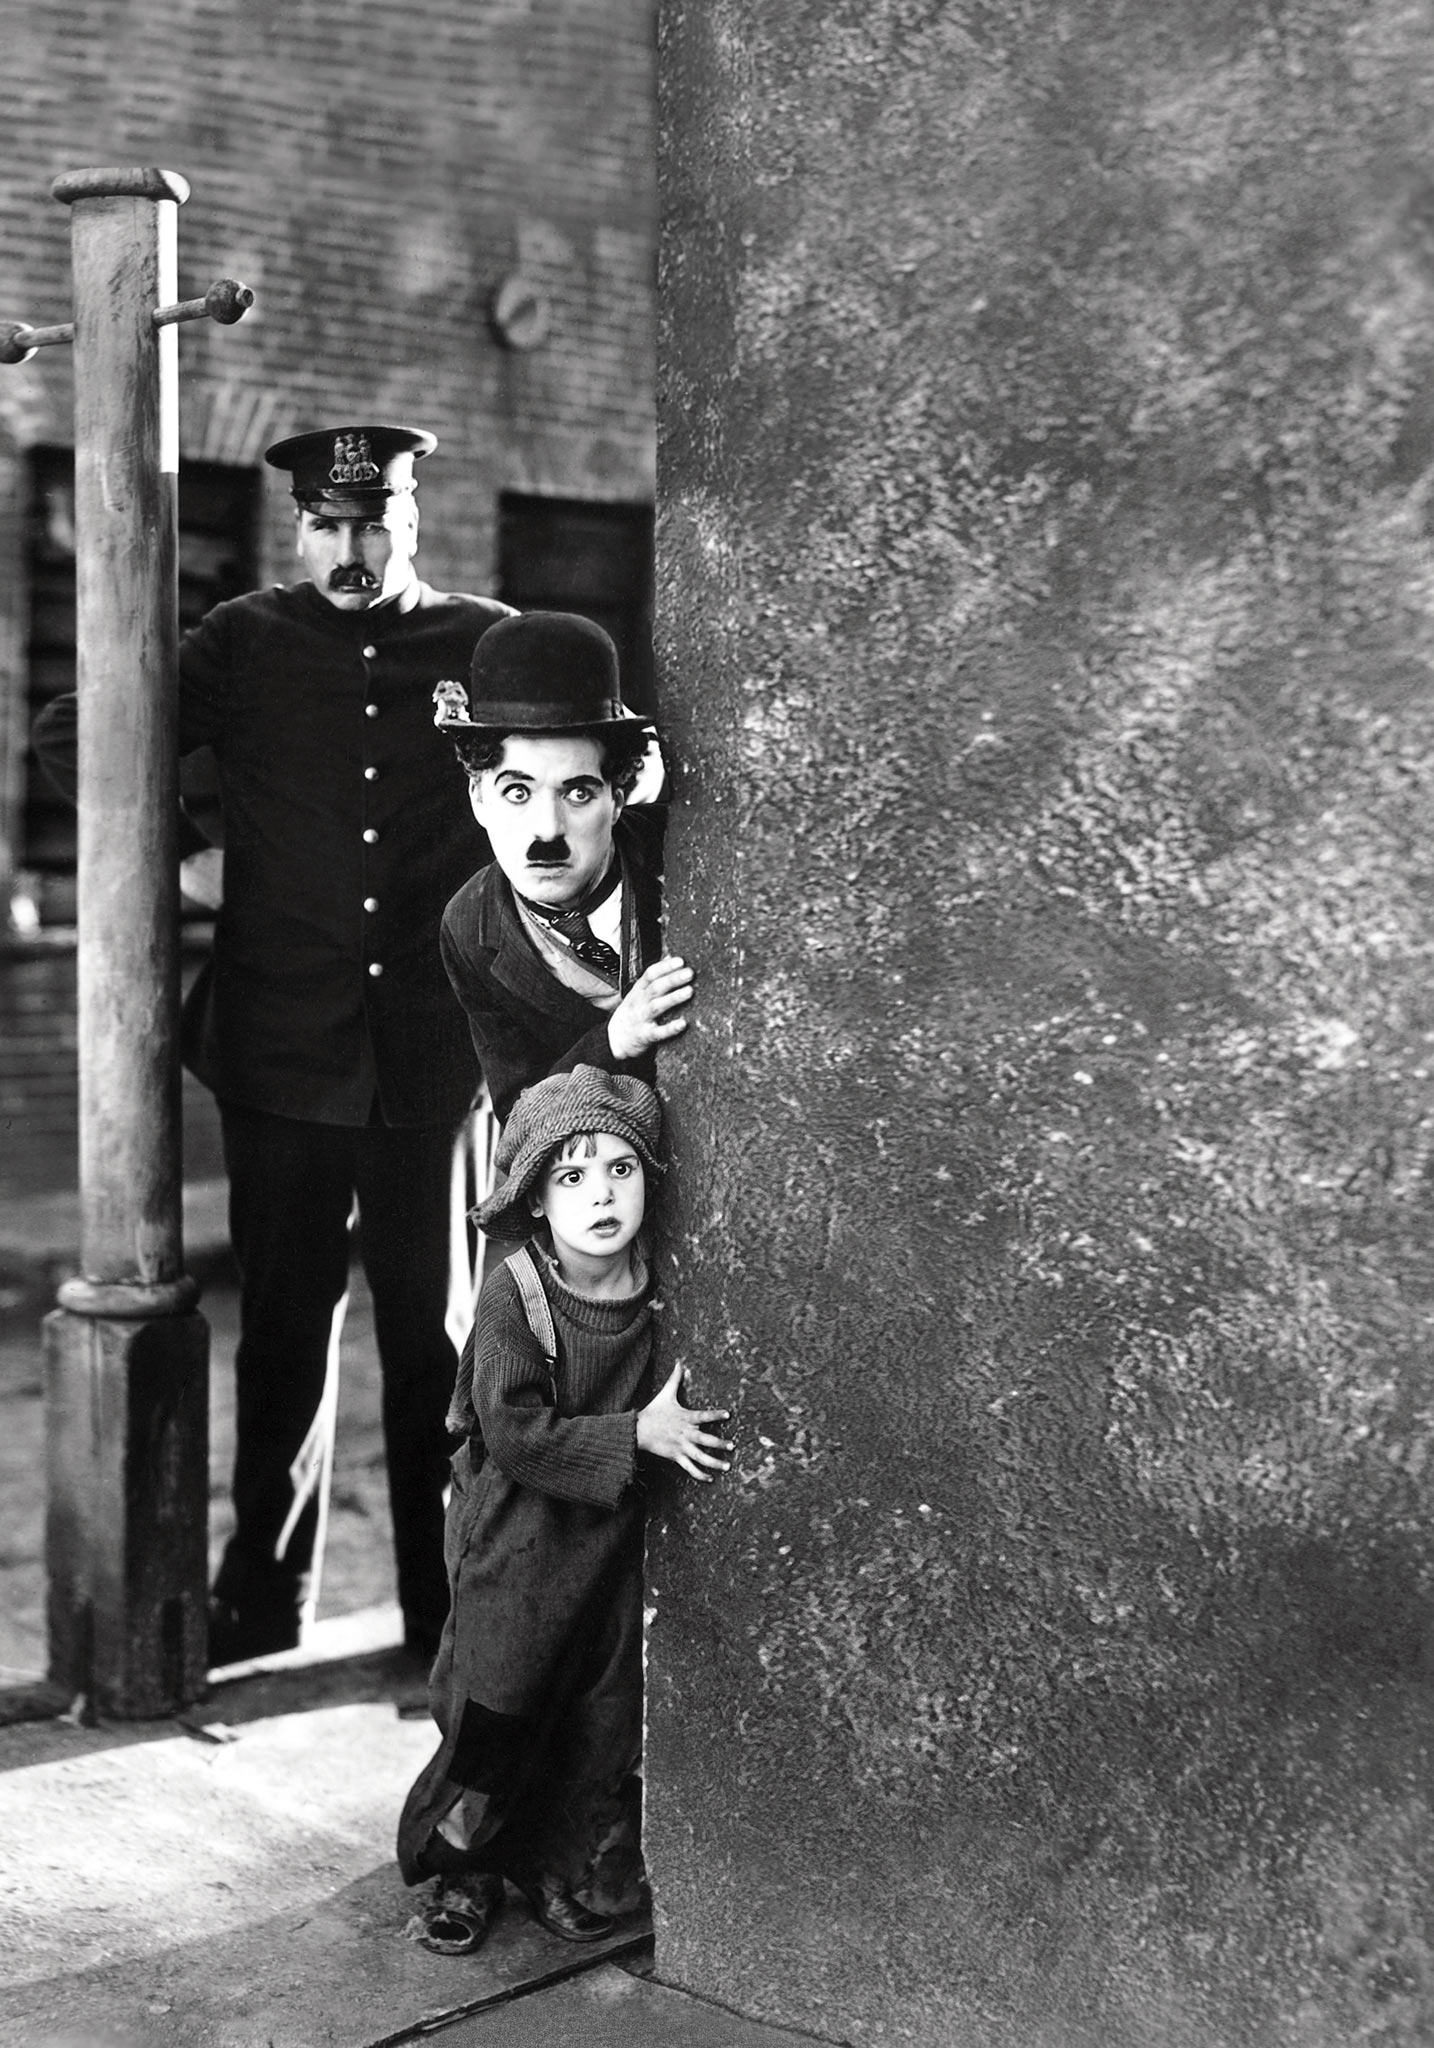 The Kid (1921) before